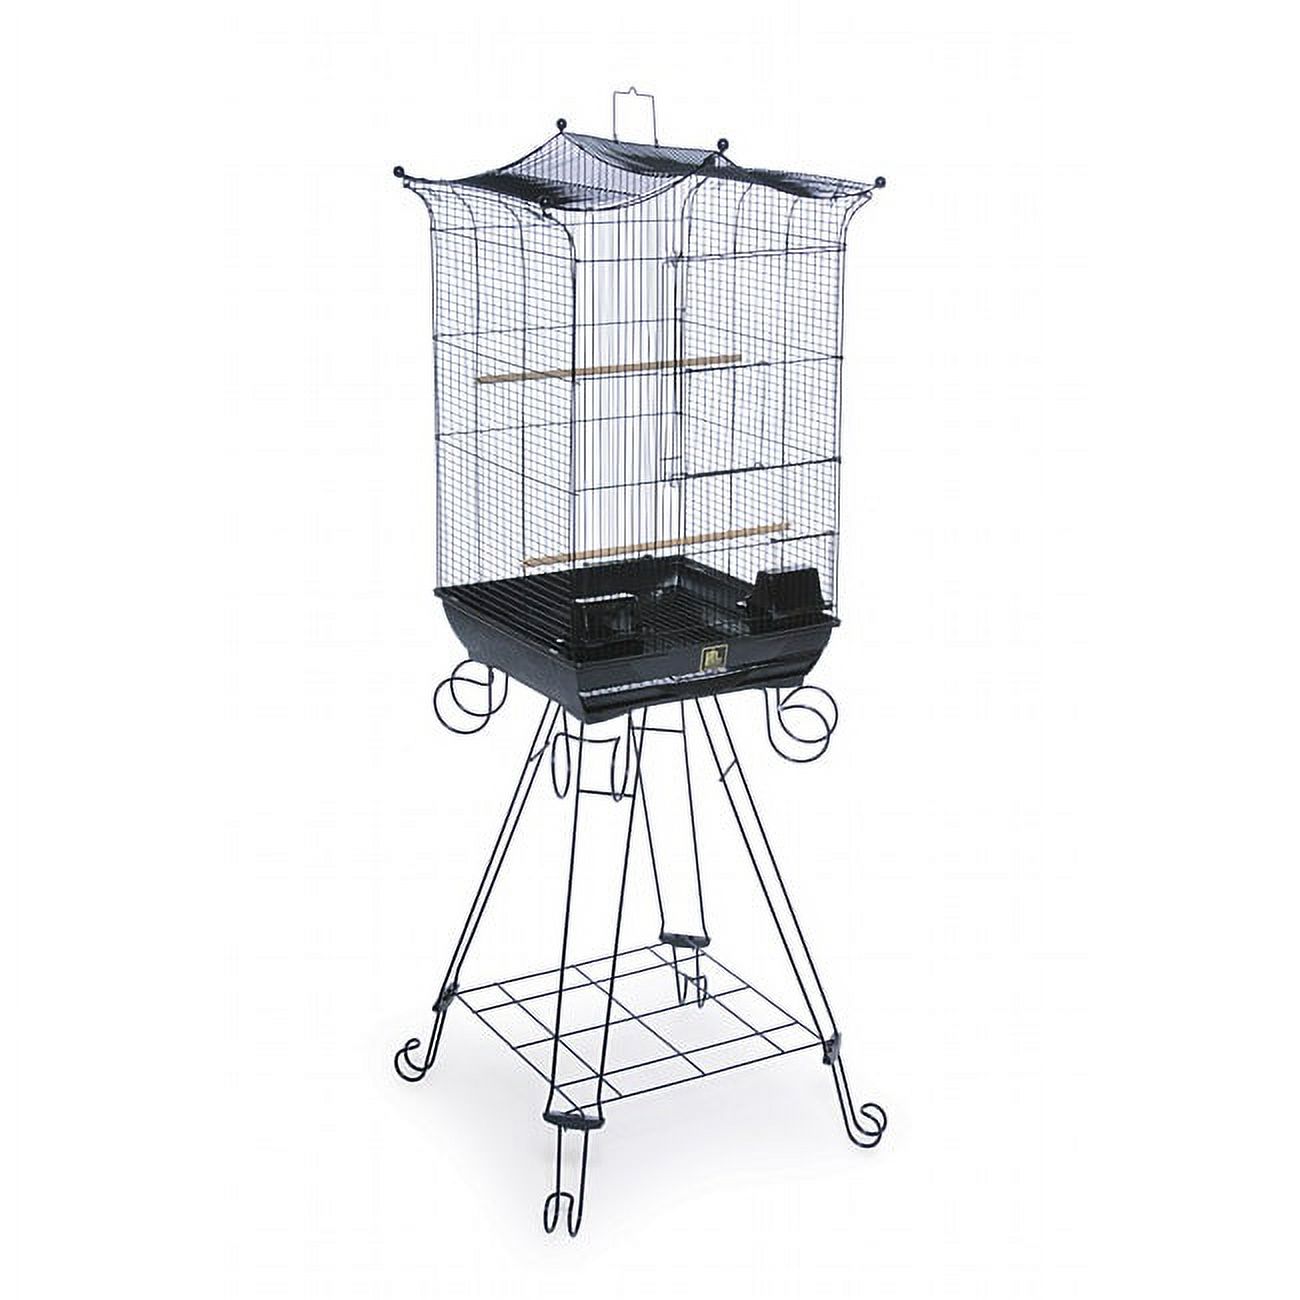 Prevue Pet Products Penthouse Suites Crown Top Cage with Stand, Black - image 2 of 5